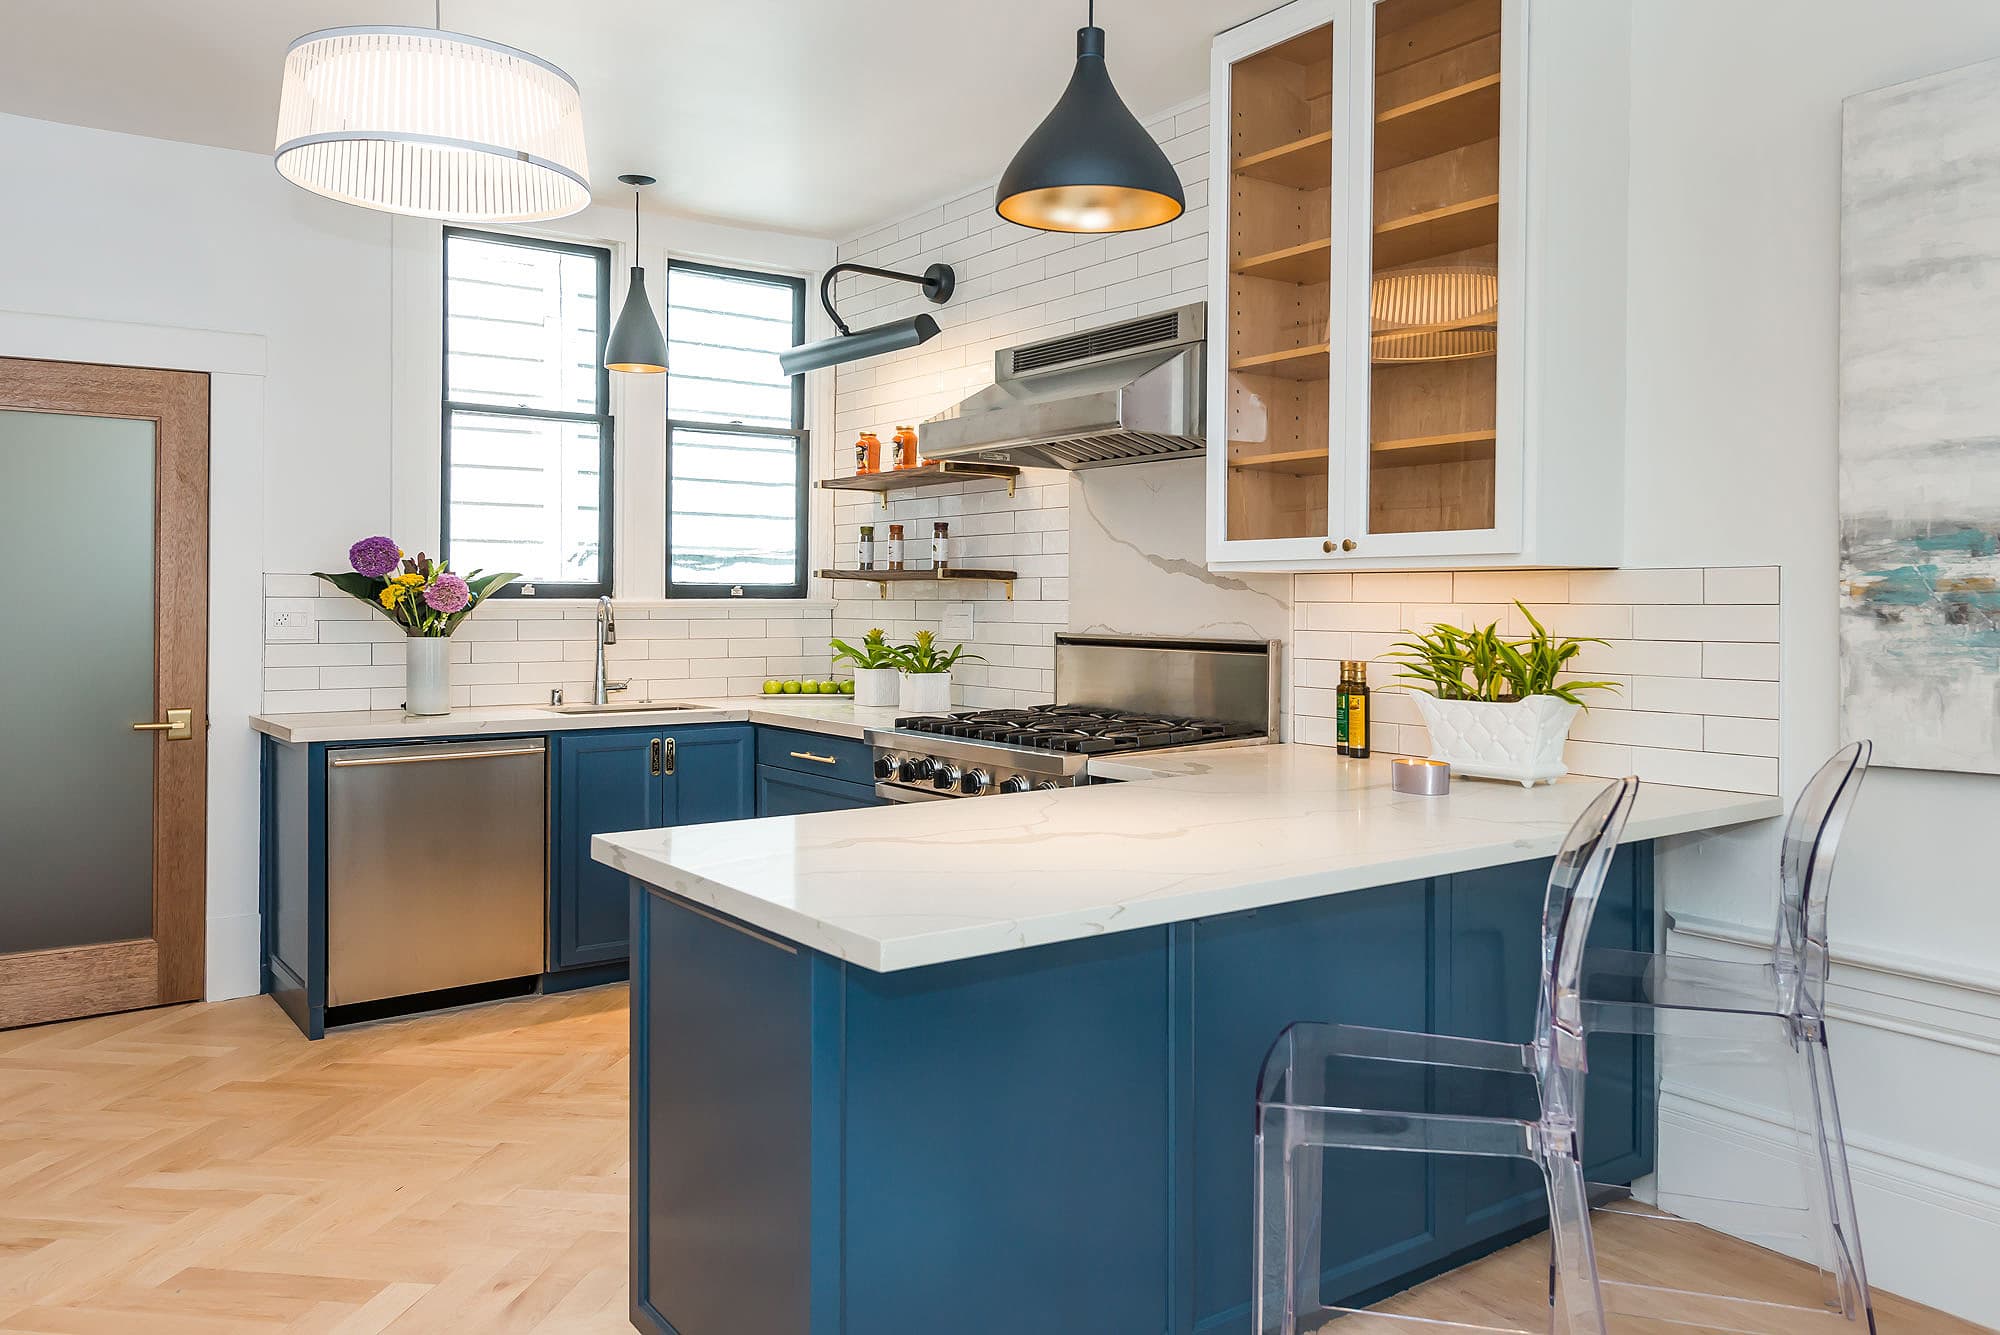 714 Page's kitchen cabinets were custom built and have extra-deep 22 inch drawers and 28-in deep counters